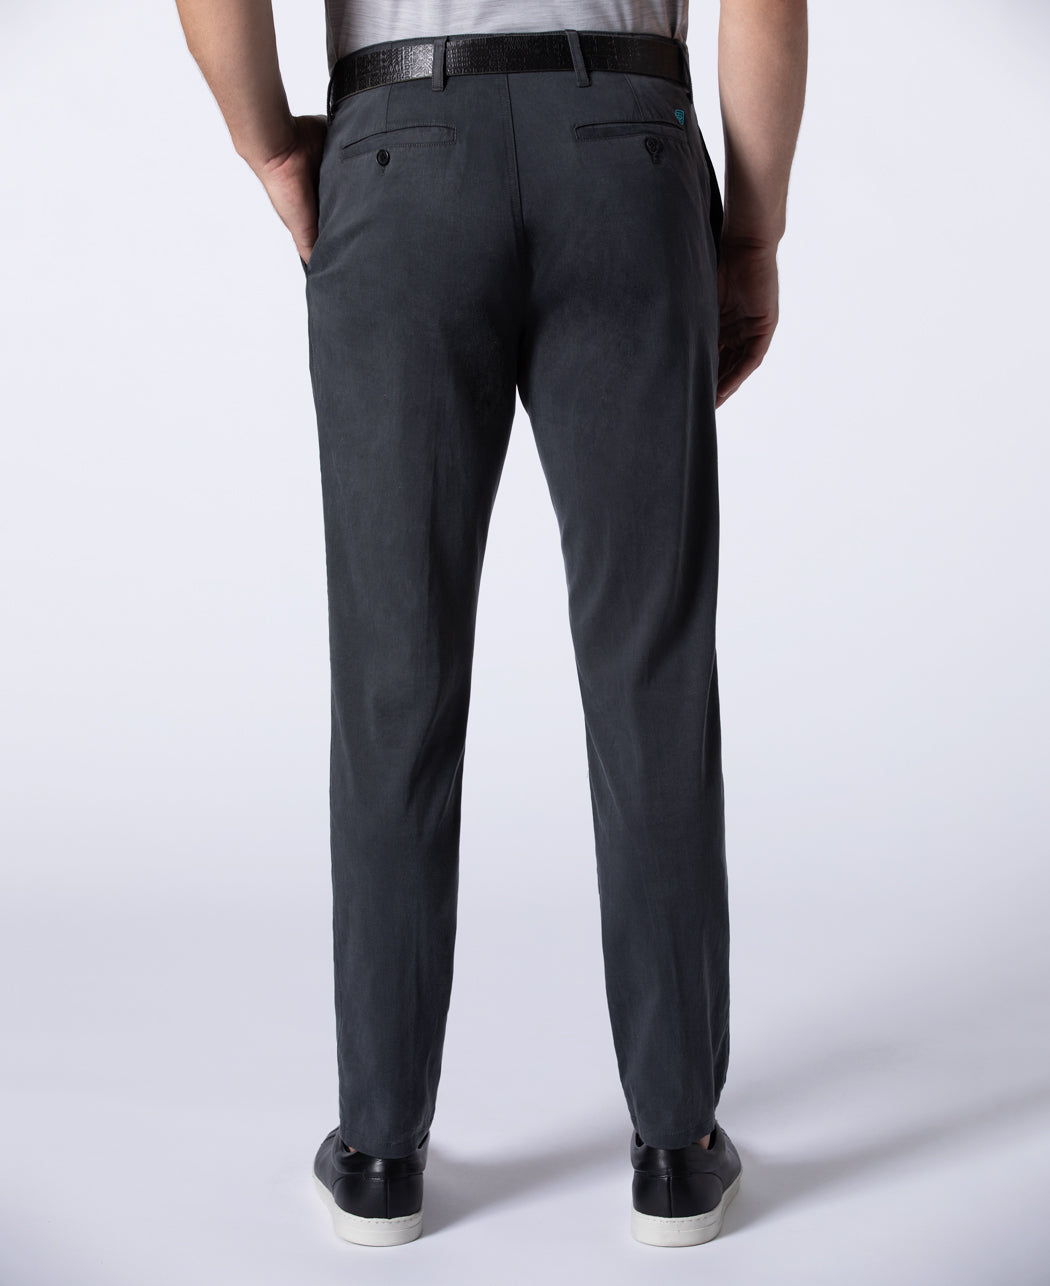 Buy Monte Carlo Mens Cotton Blend Formal Pants (2220840811Cf-1-30, Stone,  30) at Amazon.in